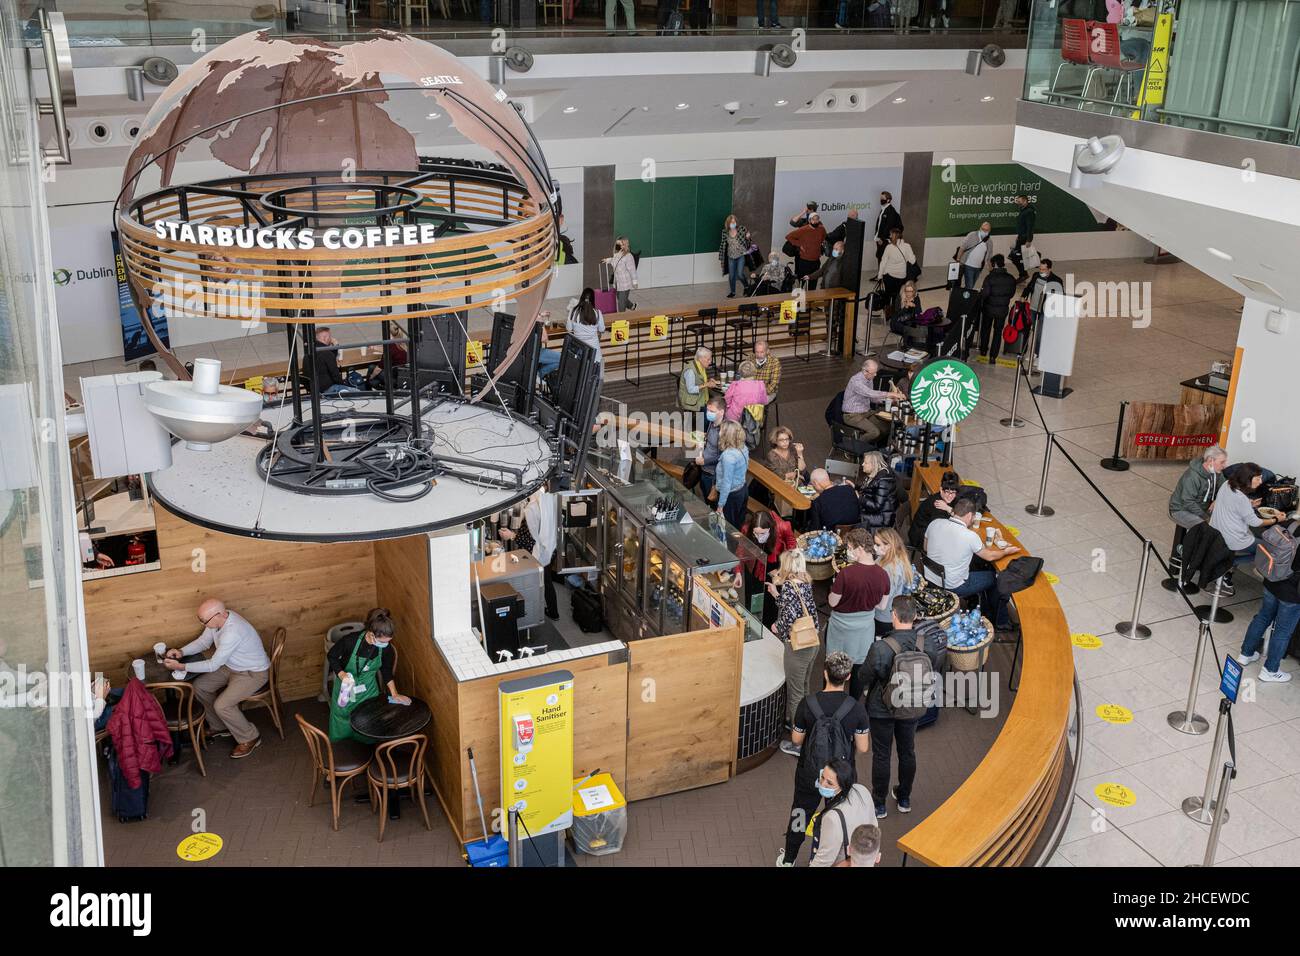 Starbucks coffe shop in the departures lounge with passengers queing to buy drinks and refreshments, Dublin Airport, Dublin, Ireland Stock Photo